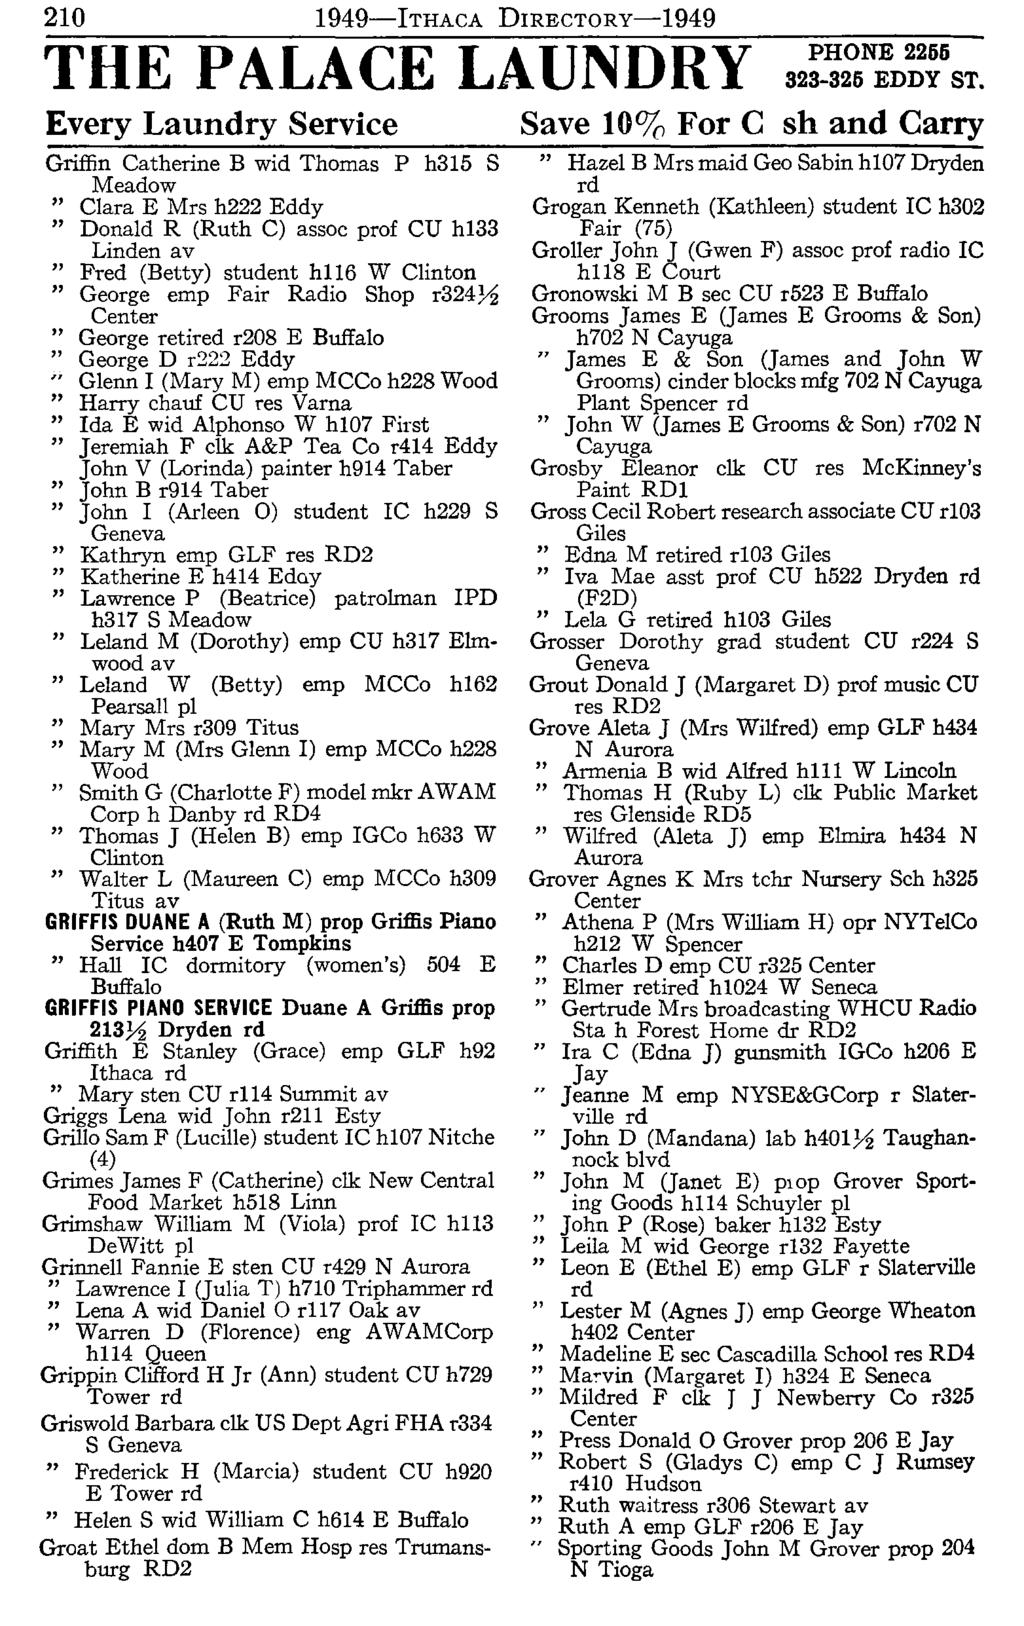 210 1949-lTHAcA DIRECTORy-1949 THE PALACE LAUNDRY Every Laundry Service Griffin Catherine B wid Thomas P h315 S Meadow Clara E Mrs h222 Eddy Donald R (Ruth C) assoc prof CU h133 Linden Fred (Betty)